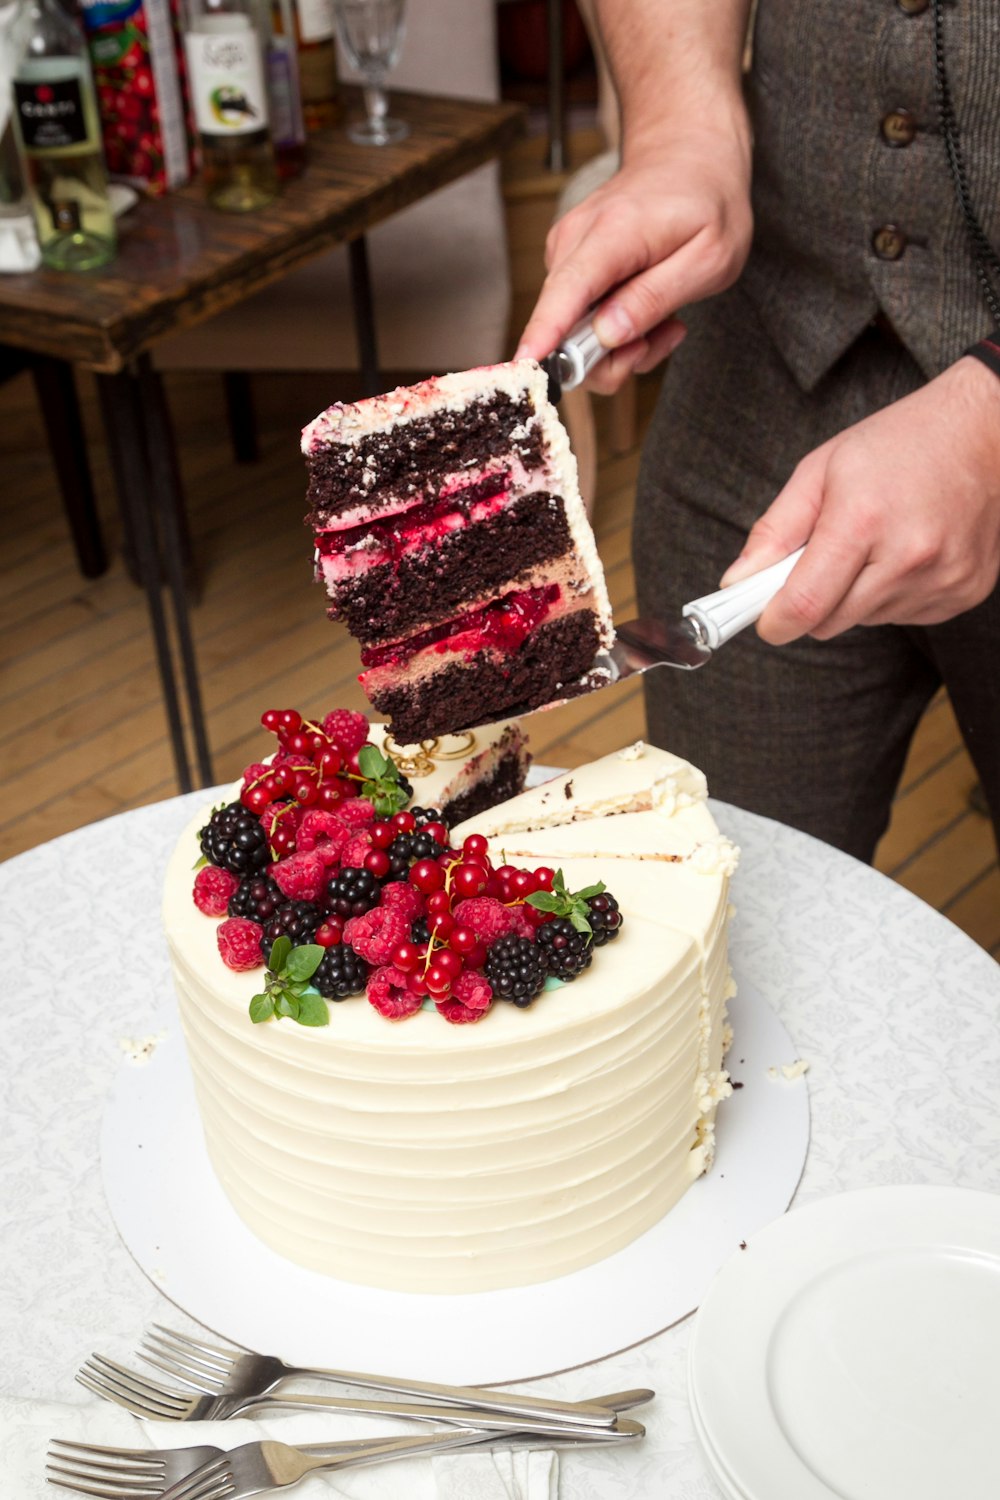 a person cutting a piece of cake with a knife and fork